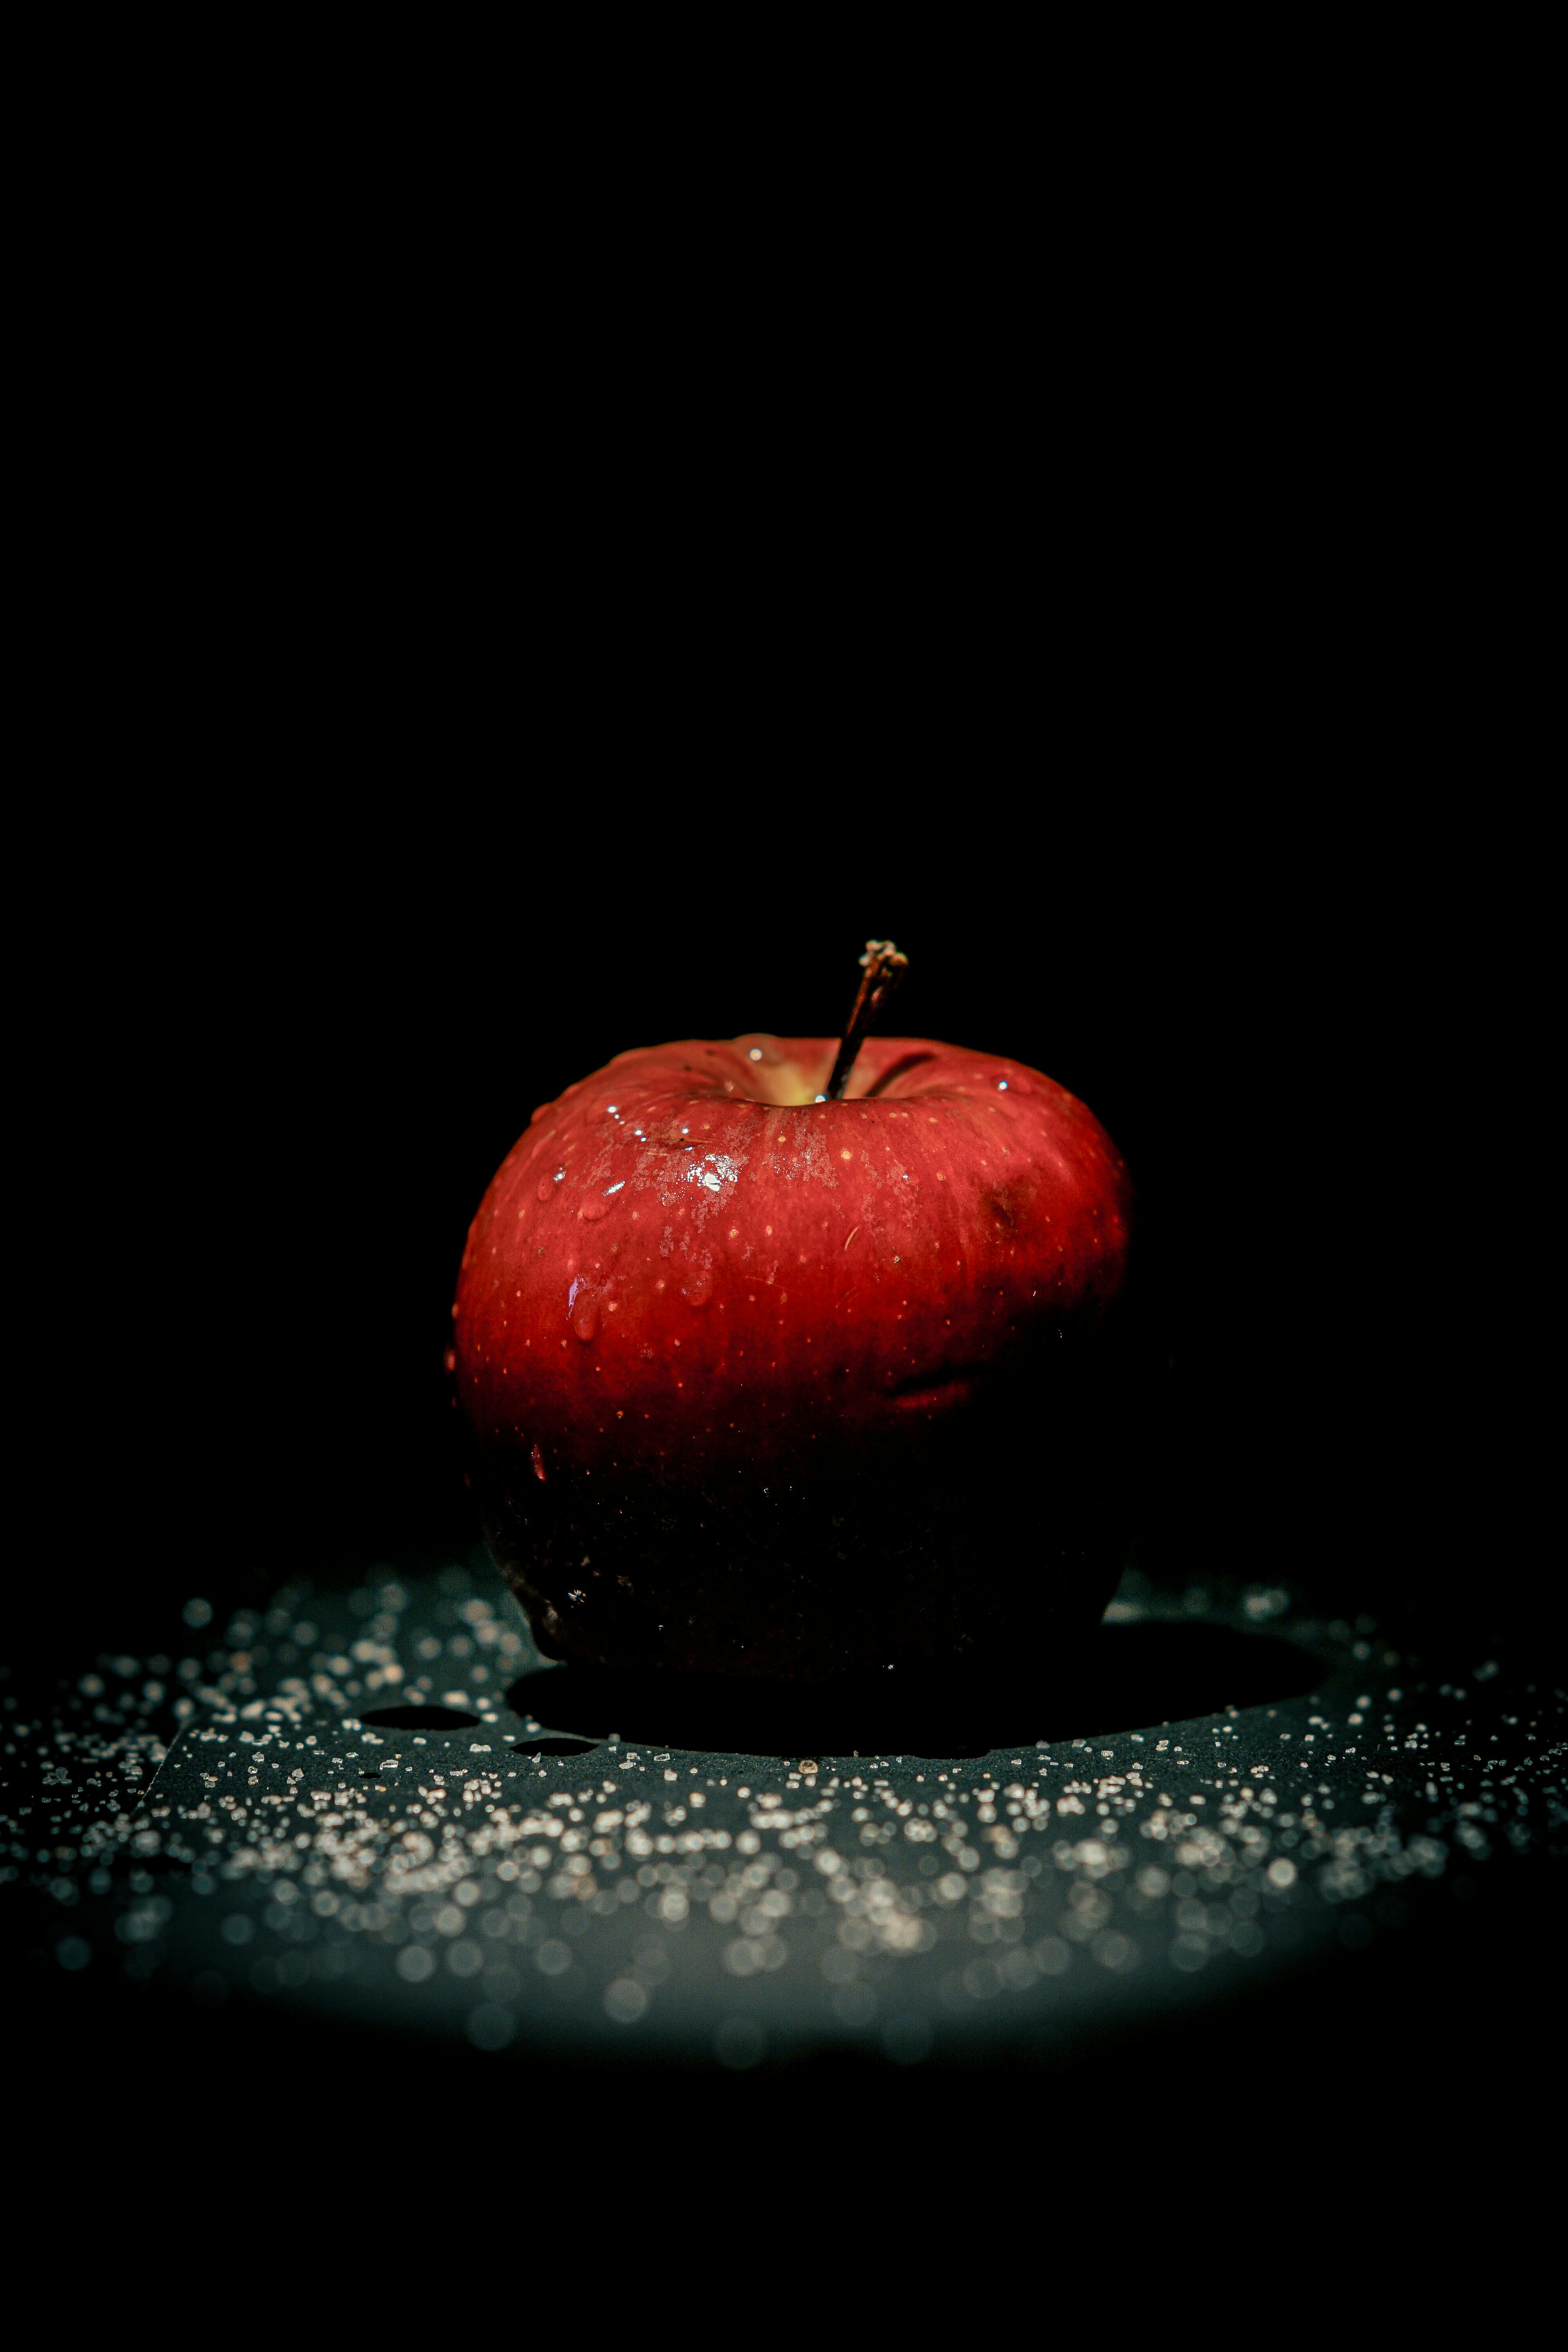 Red Apple Fruit With Black Background · Free Stock Photo